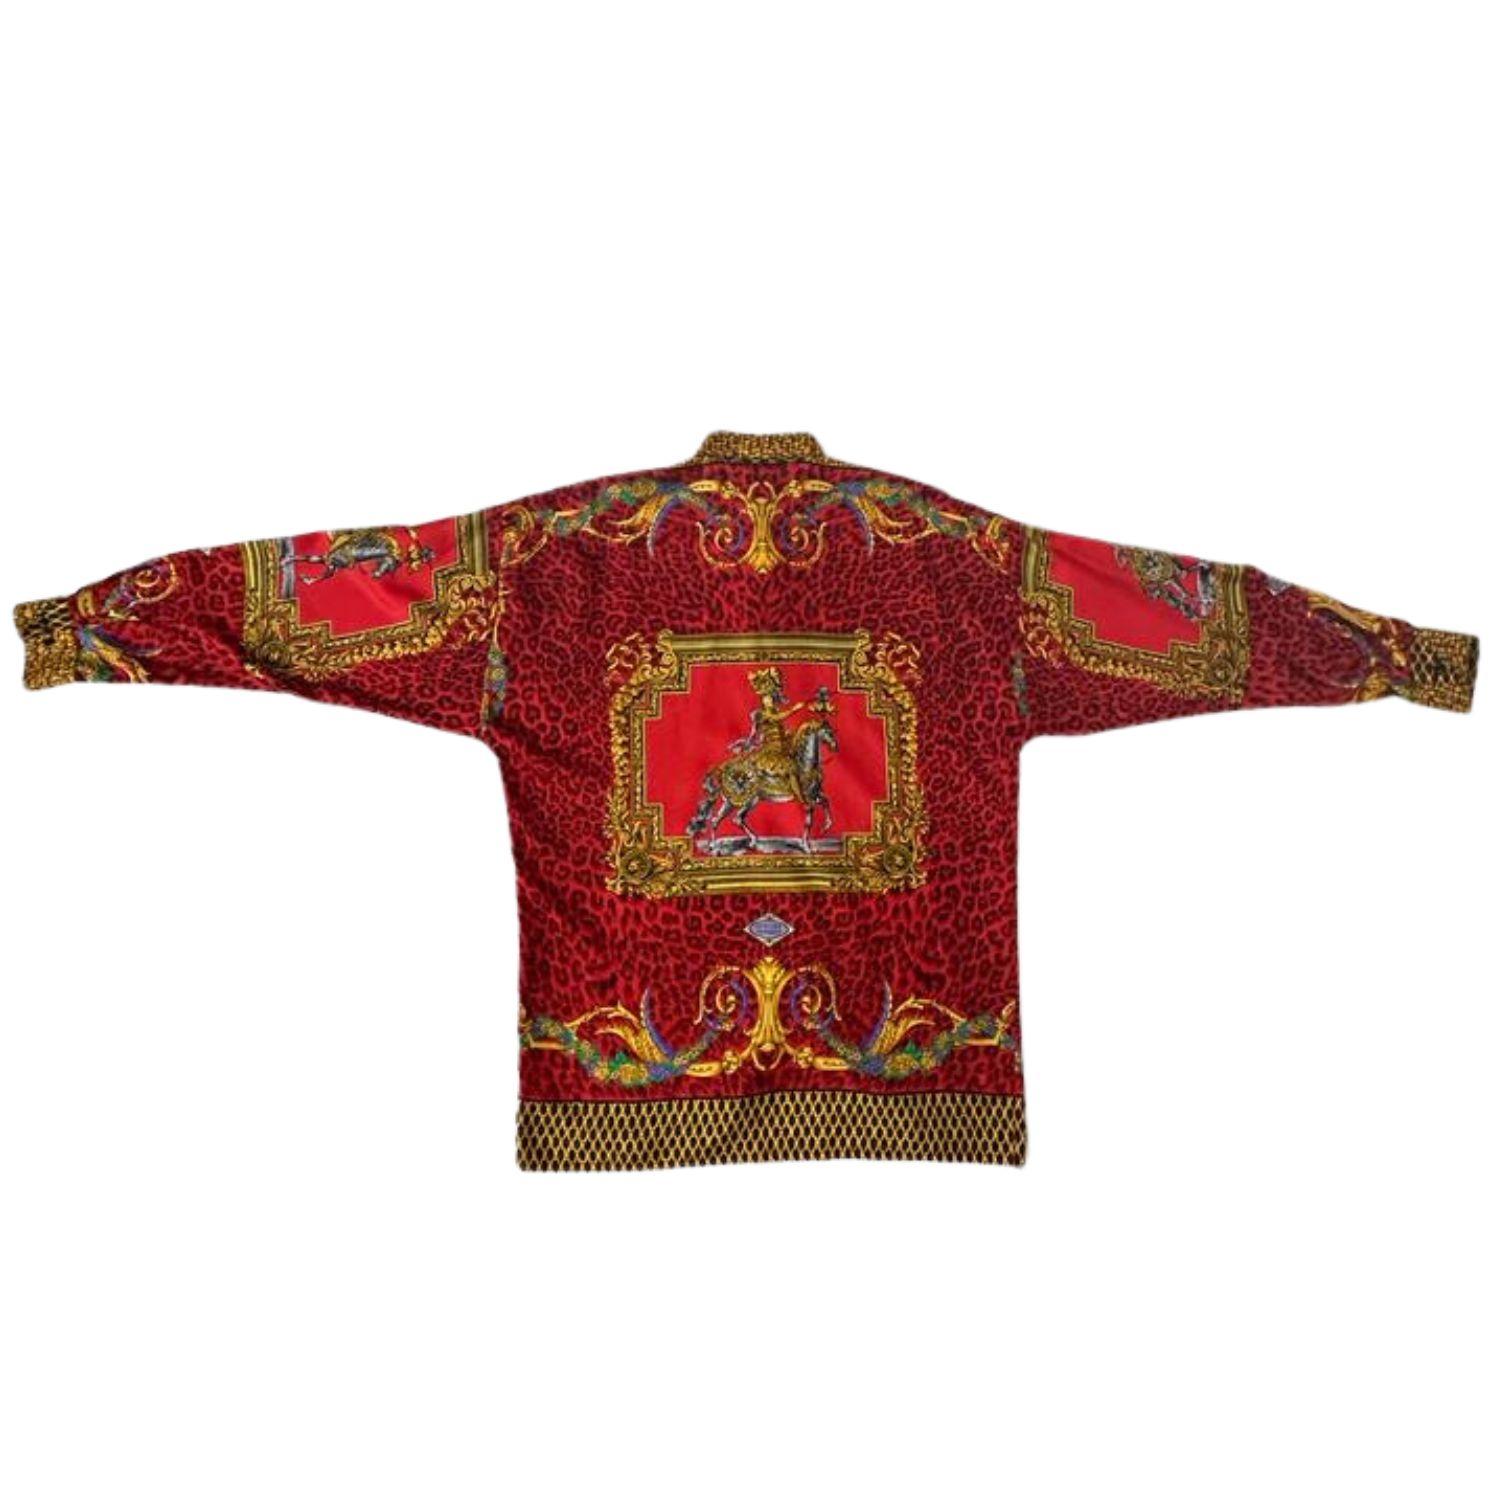 Women's or Men's 1990s Gianni Versace Red & Gold Silk Twill Baroque Leopard Shirt For Sale